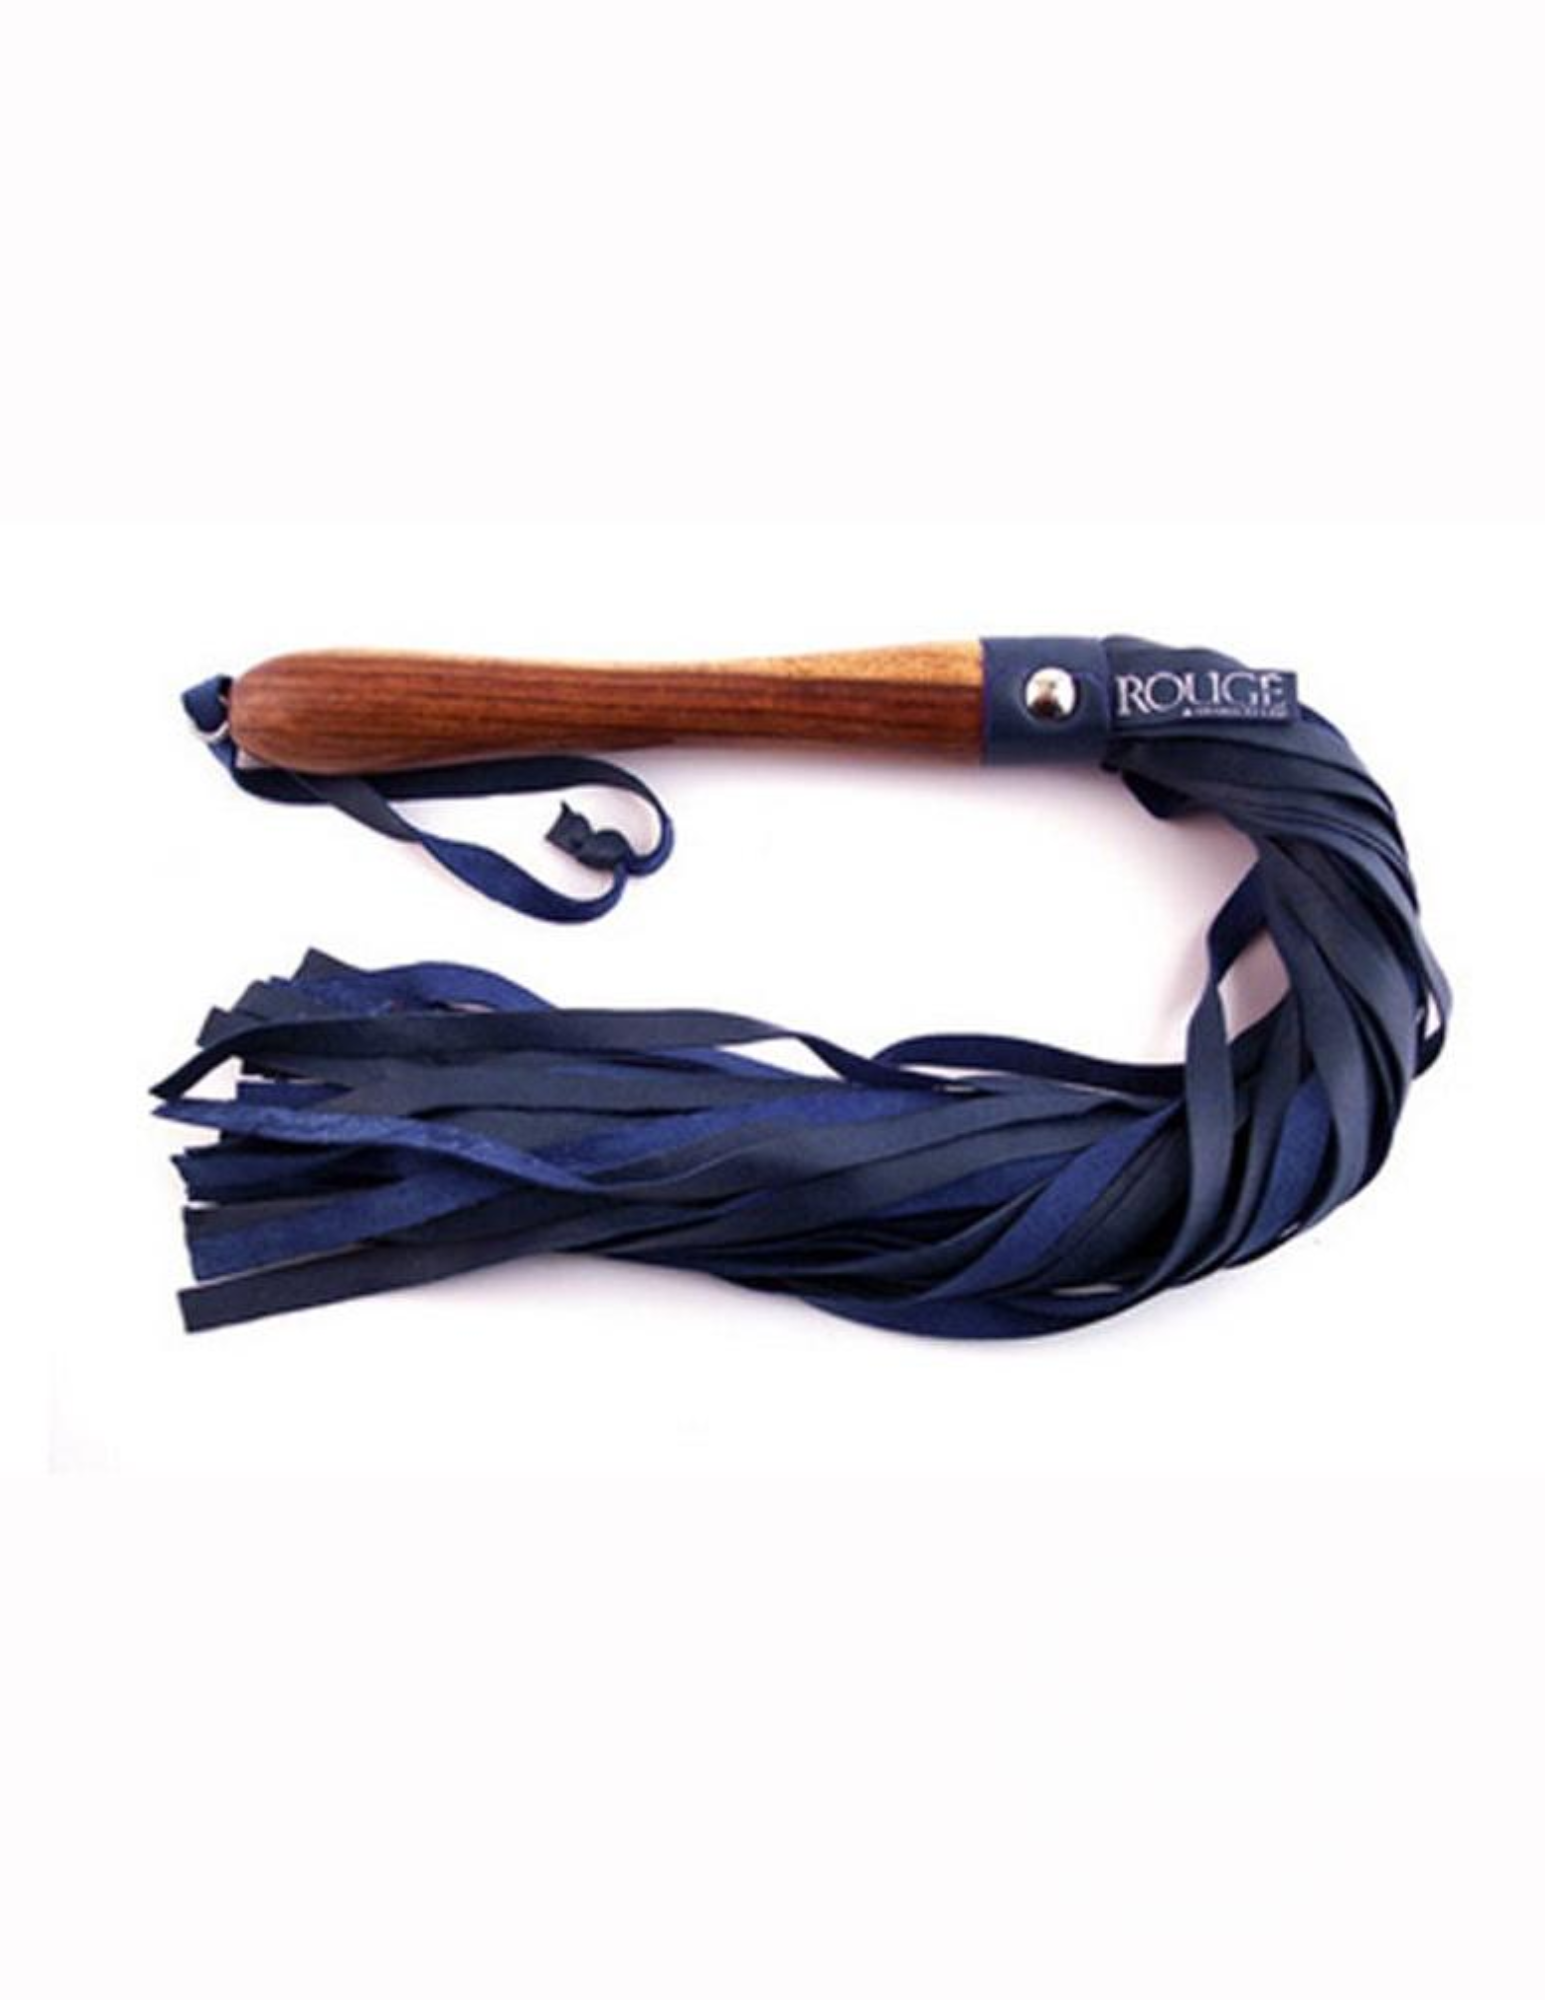 Photo of the Wooden Handled Leather Flogger from Rouge (blue) shows its sturdy handle and soft, flexible, leather tresses.